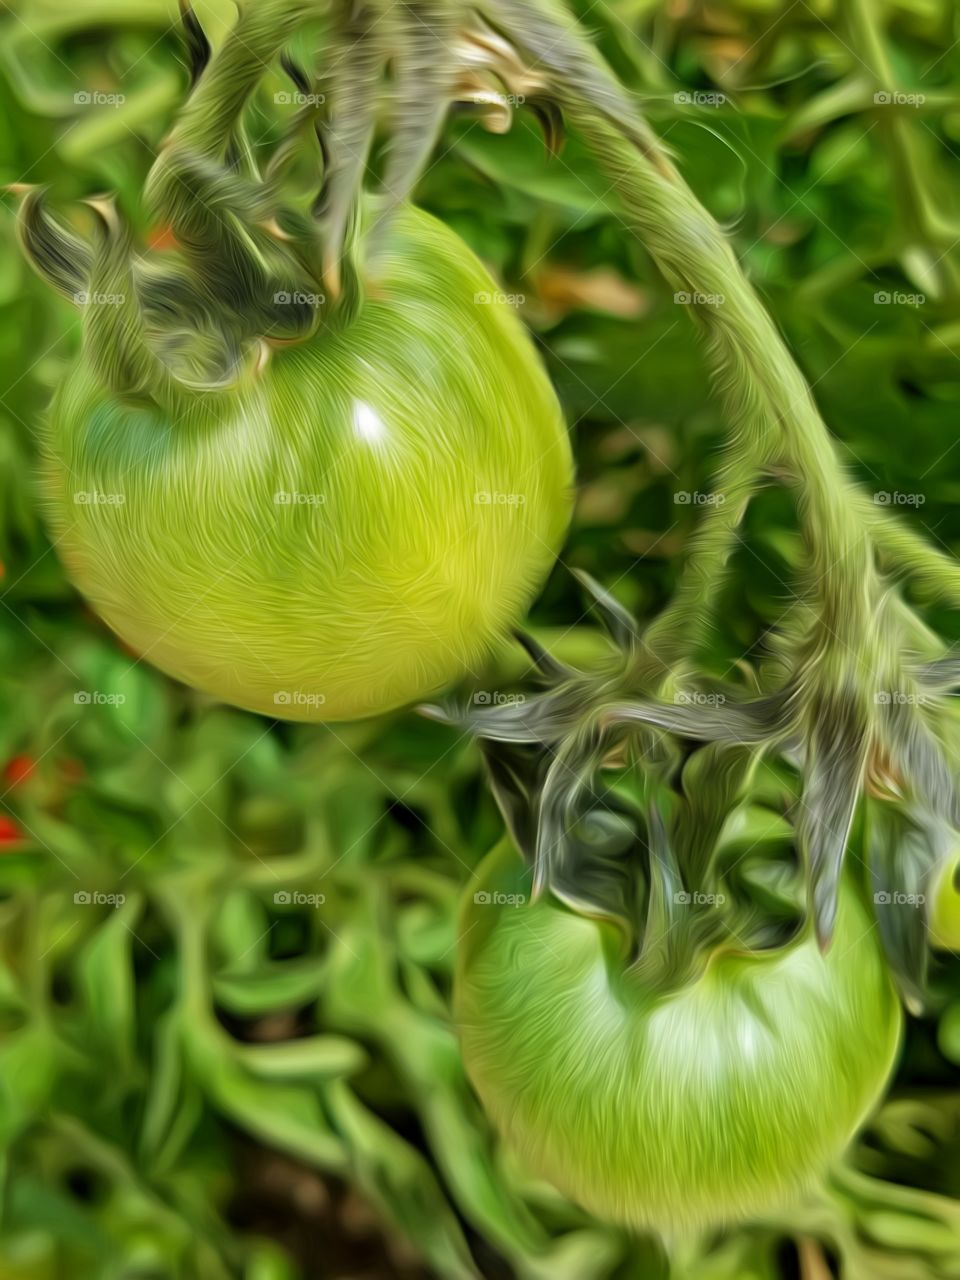 Green Tomatoes on the Vine!